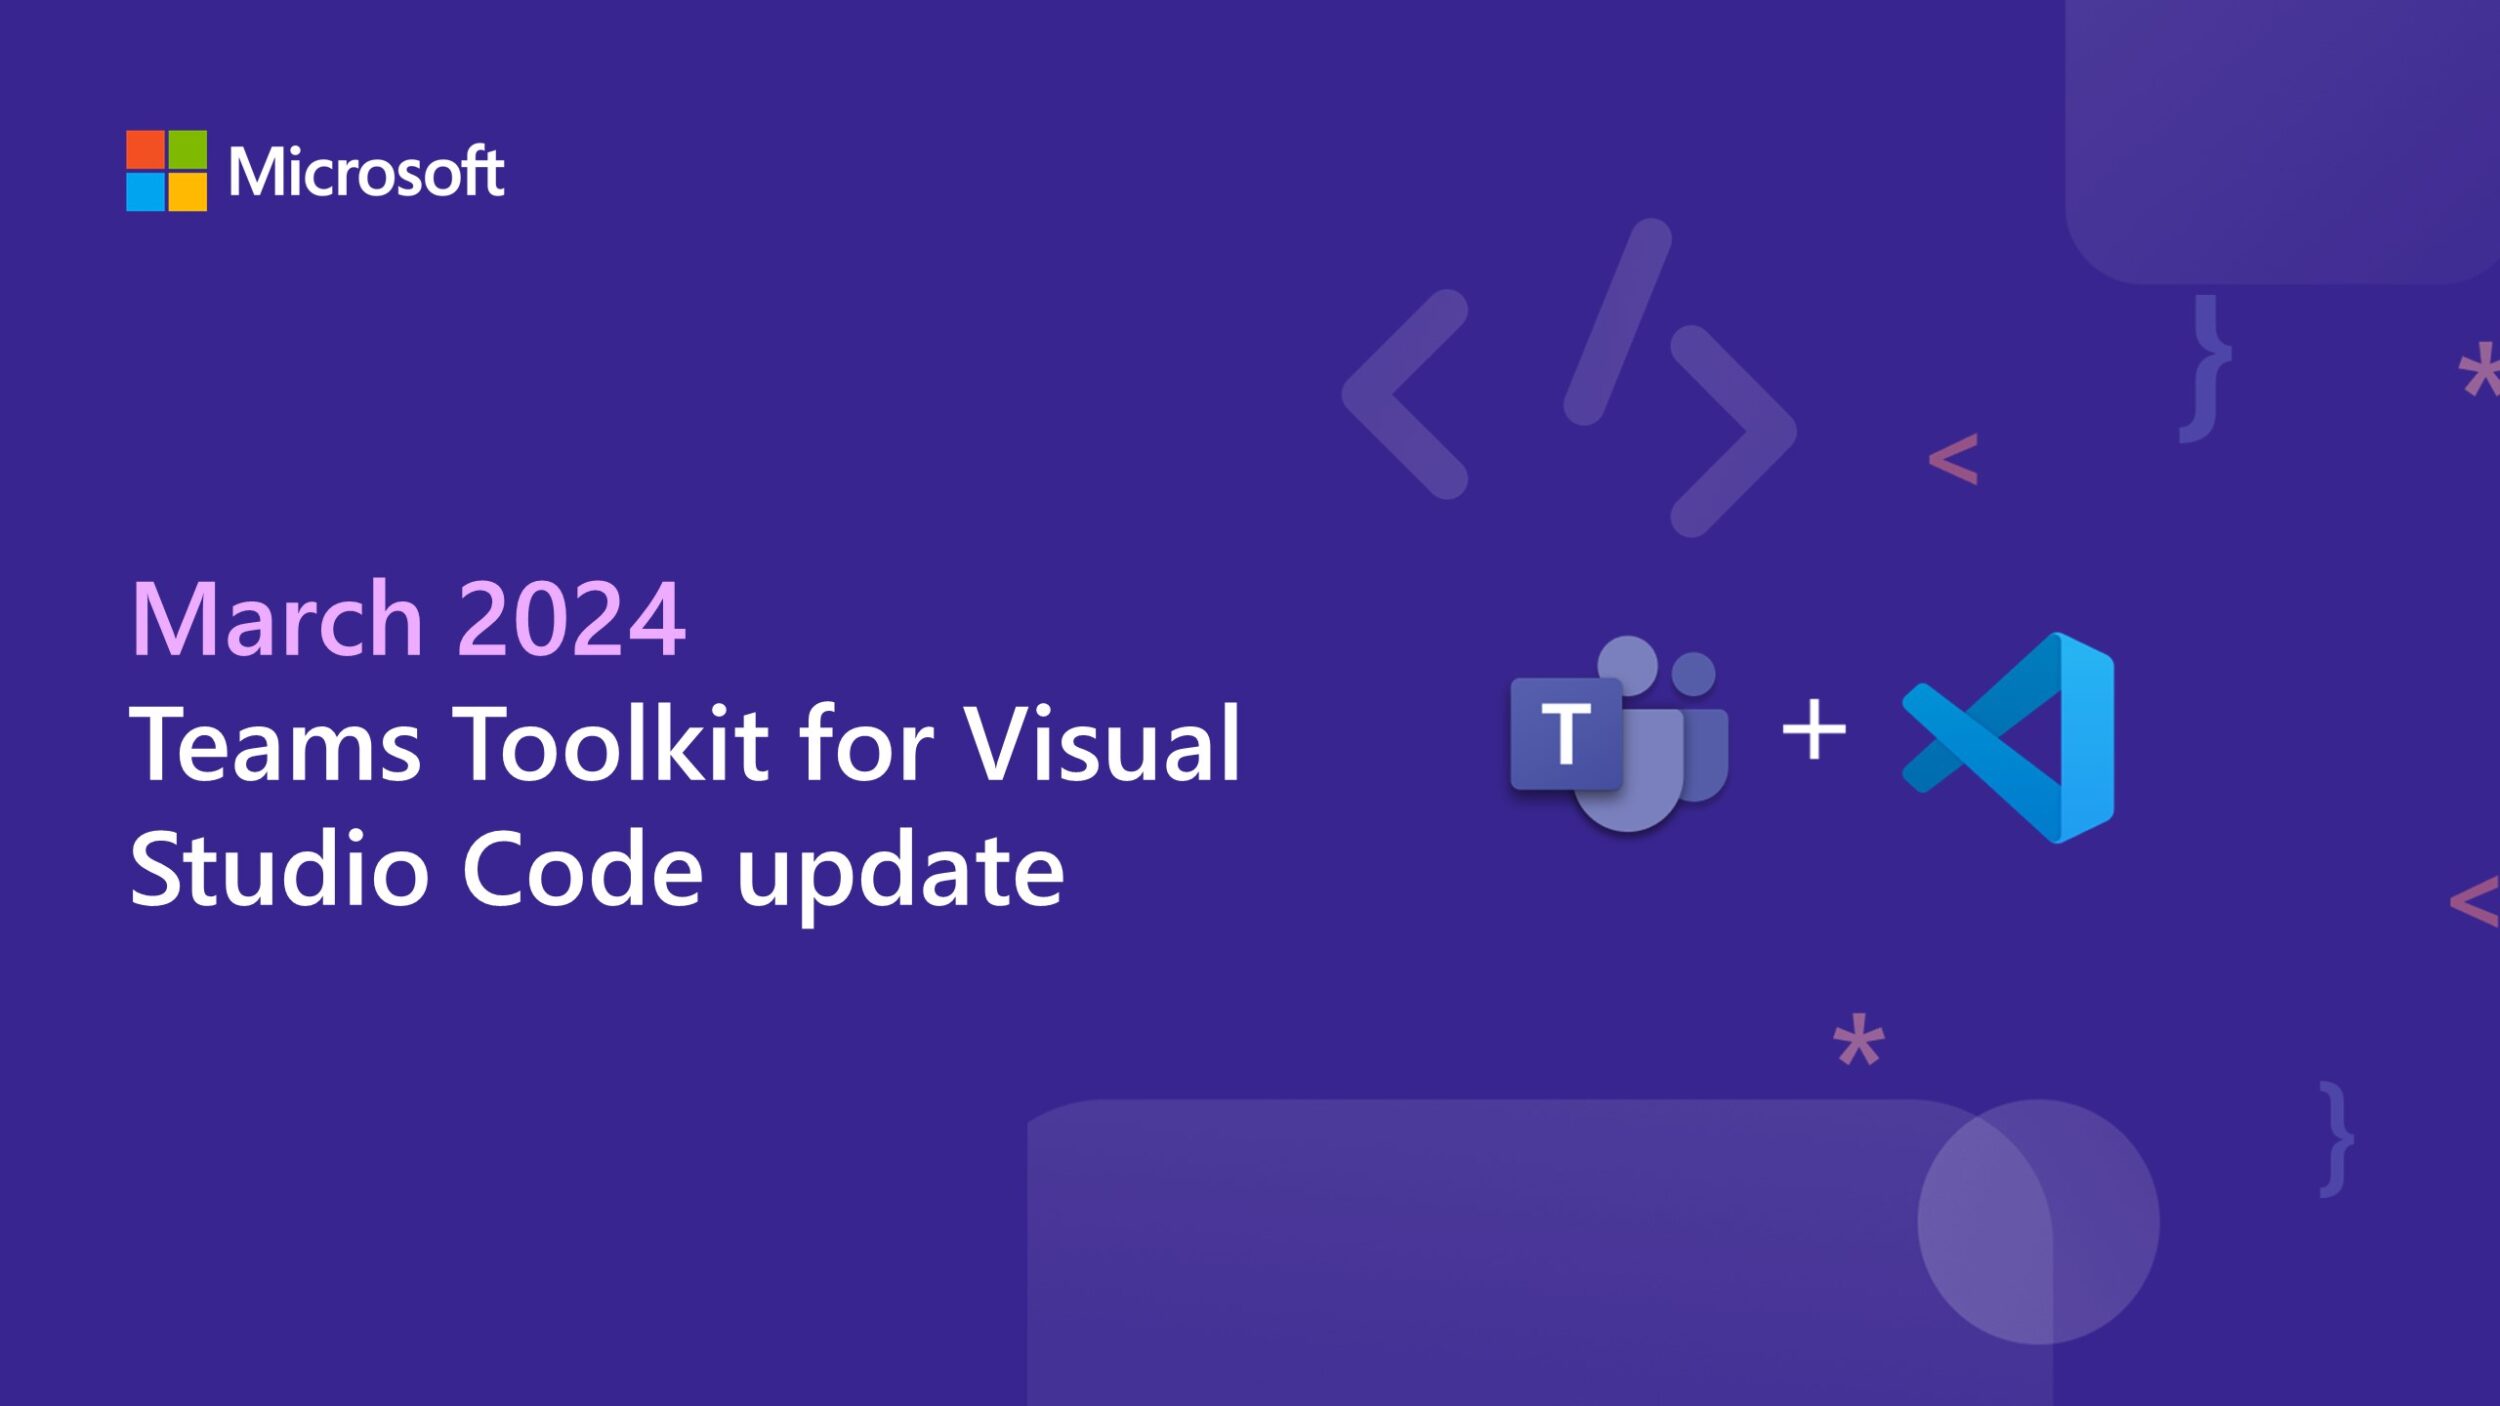 Teams Toolkit for Visual Studio Code update – March 2024